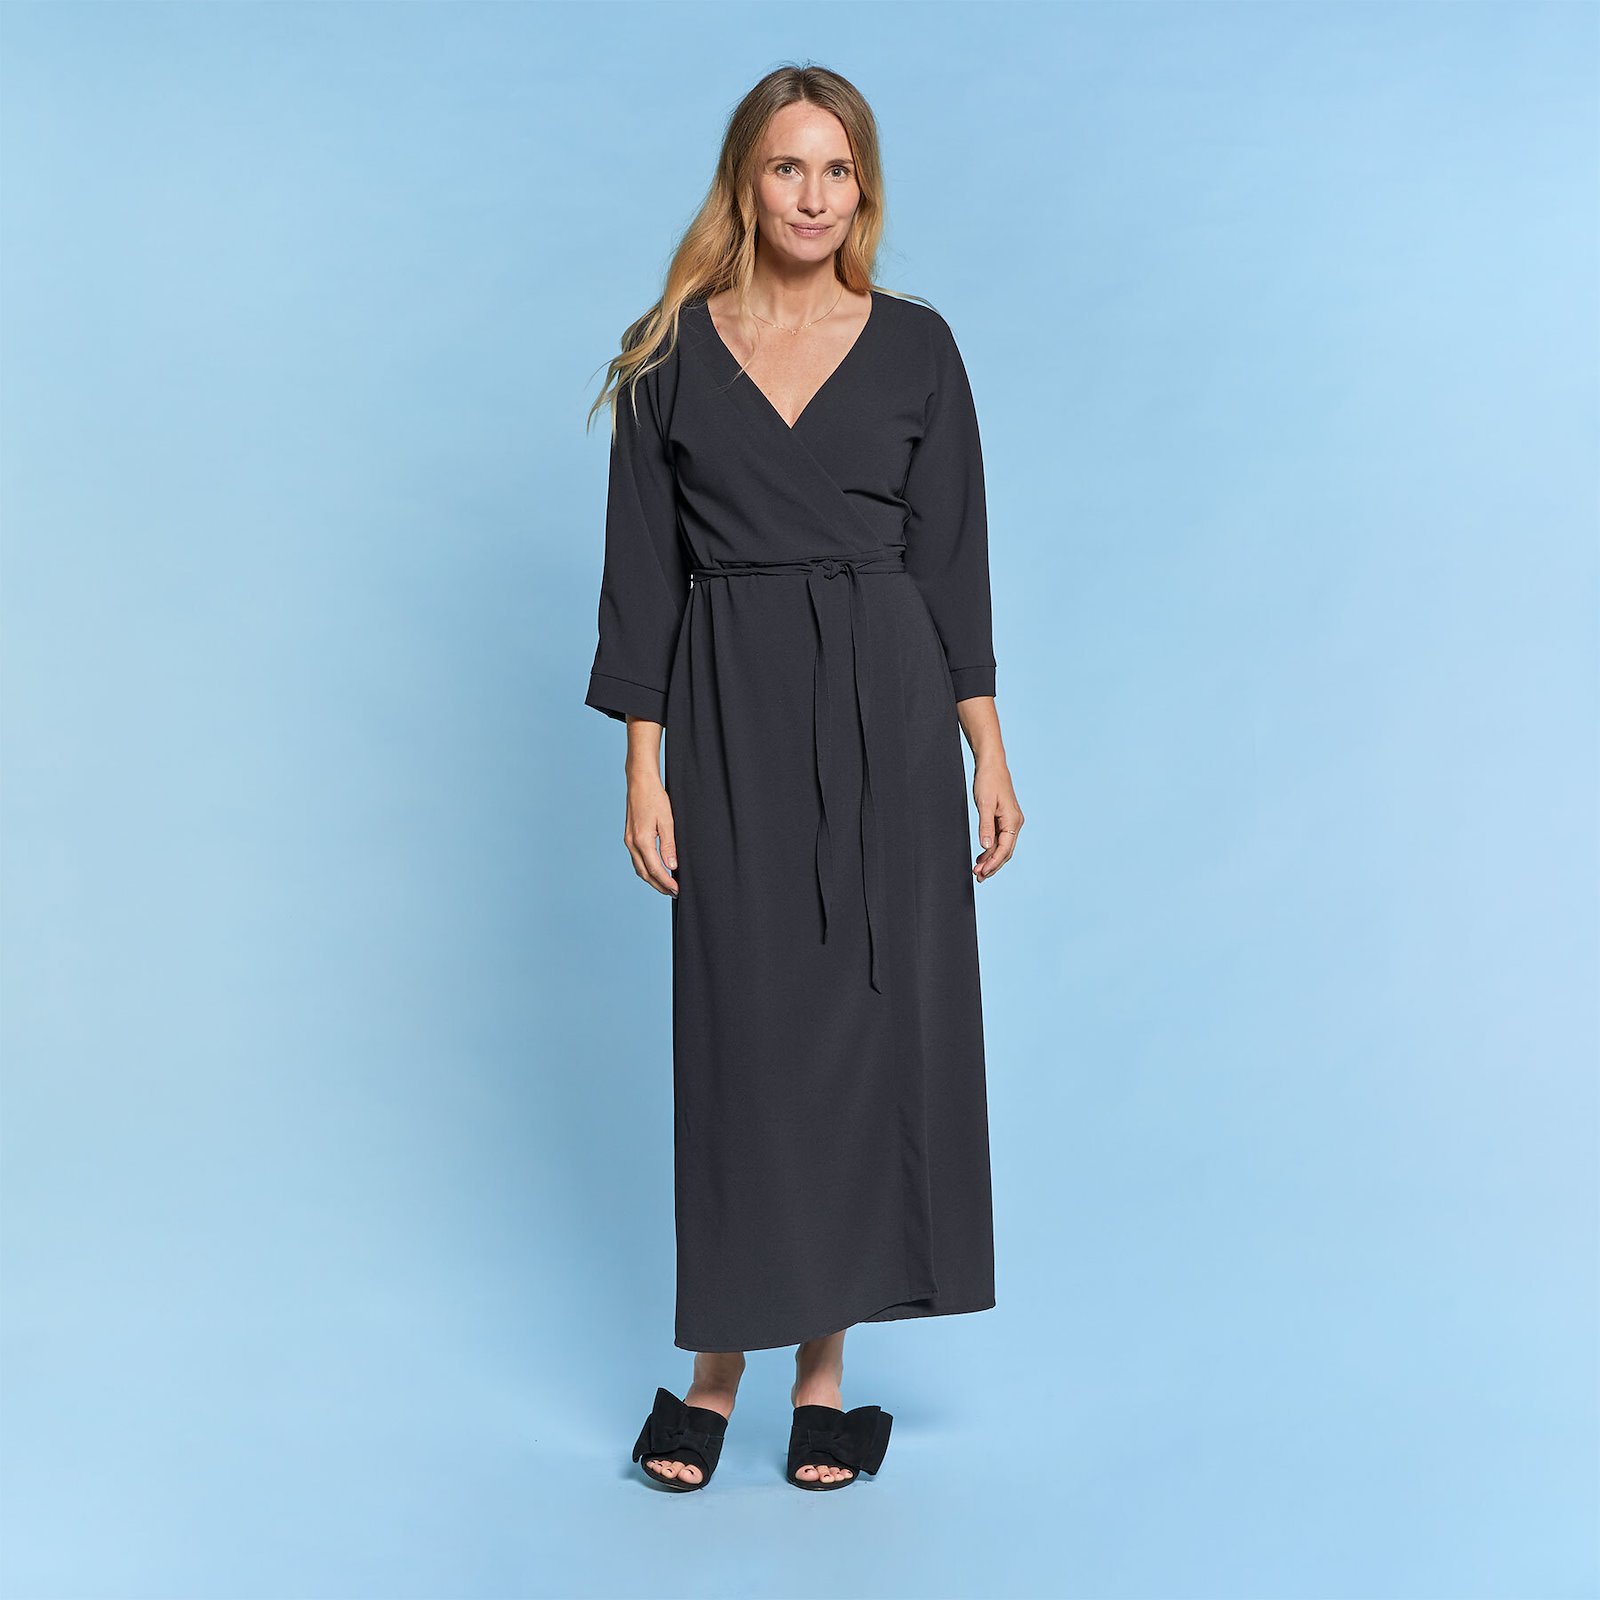 Wrap dress with batwing sleeves, 36/8 p23162000_p23162001_p23162002_p23162003_p23162004_pack_d